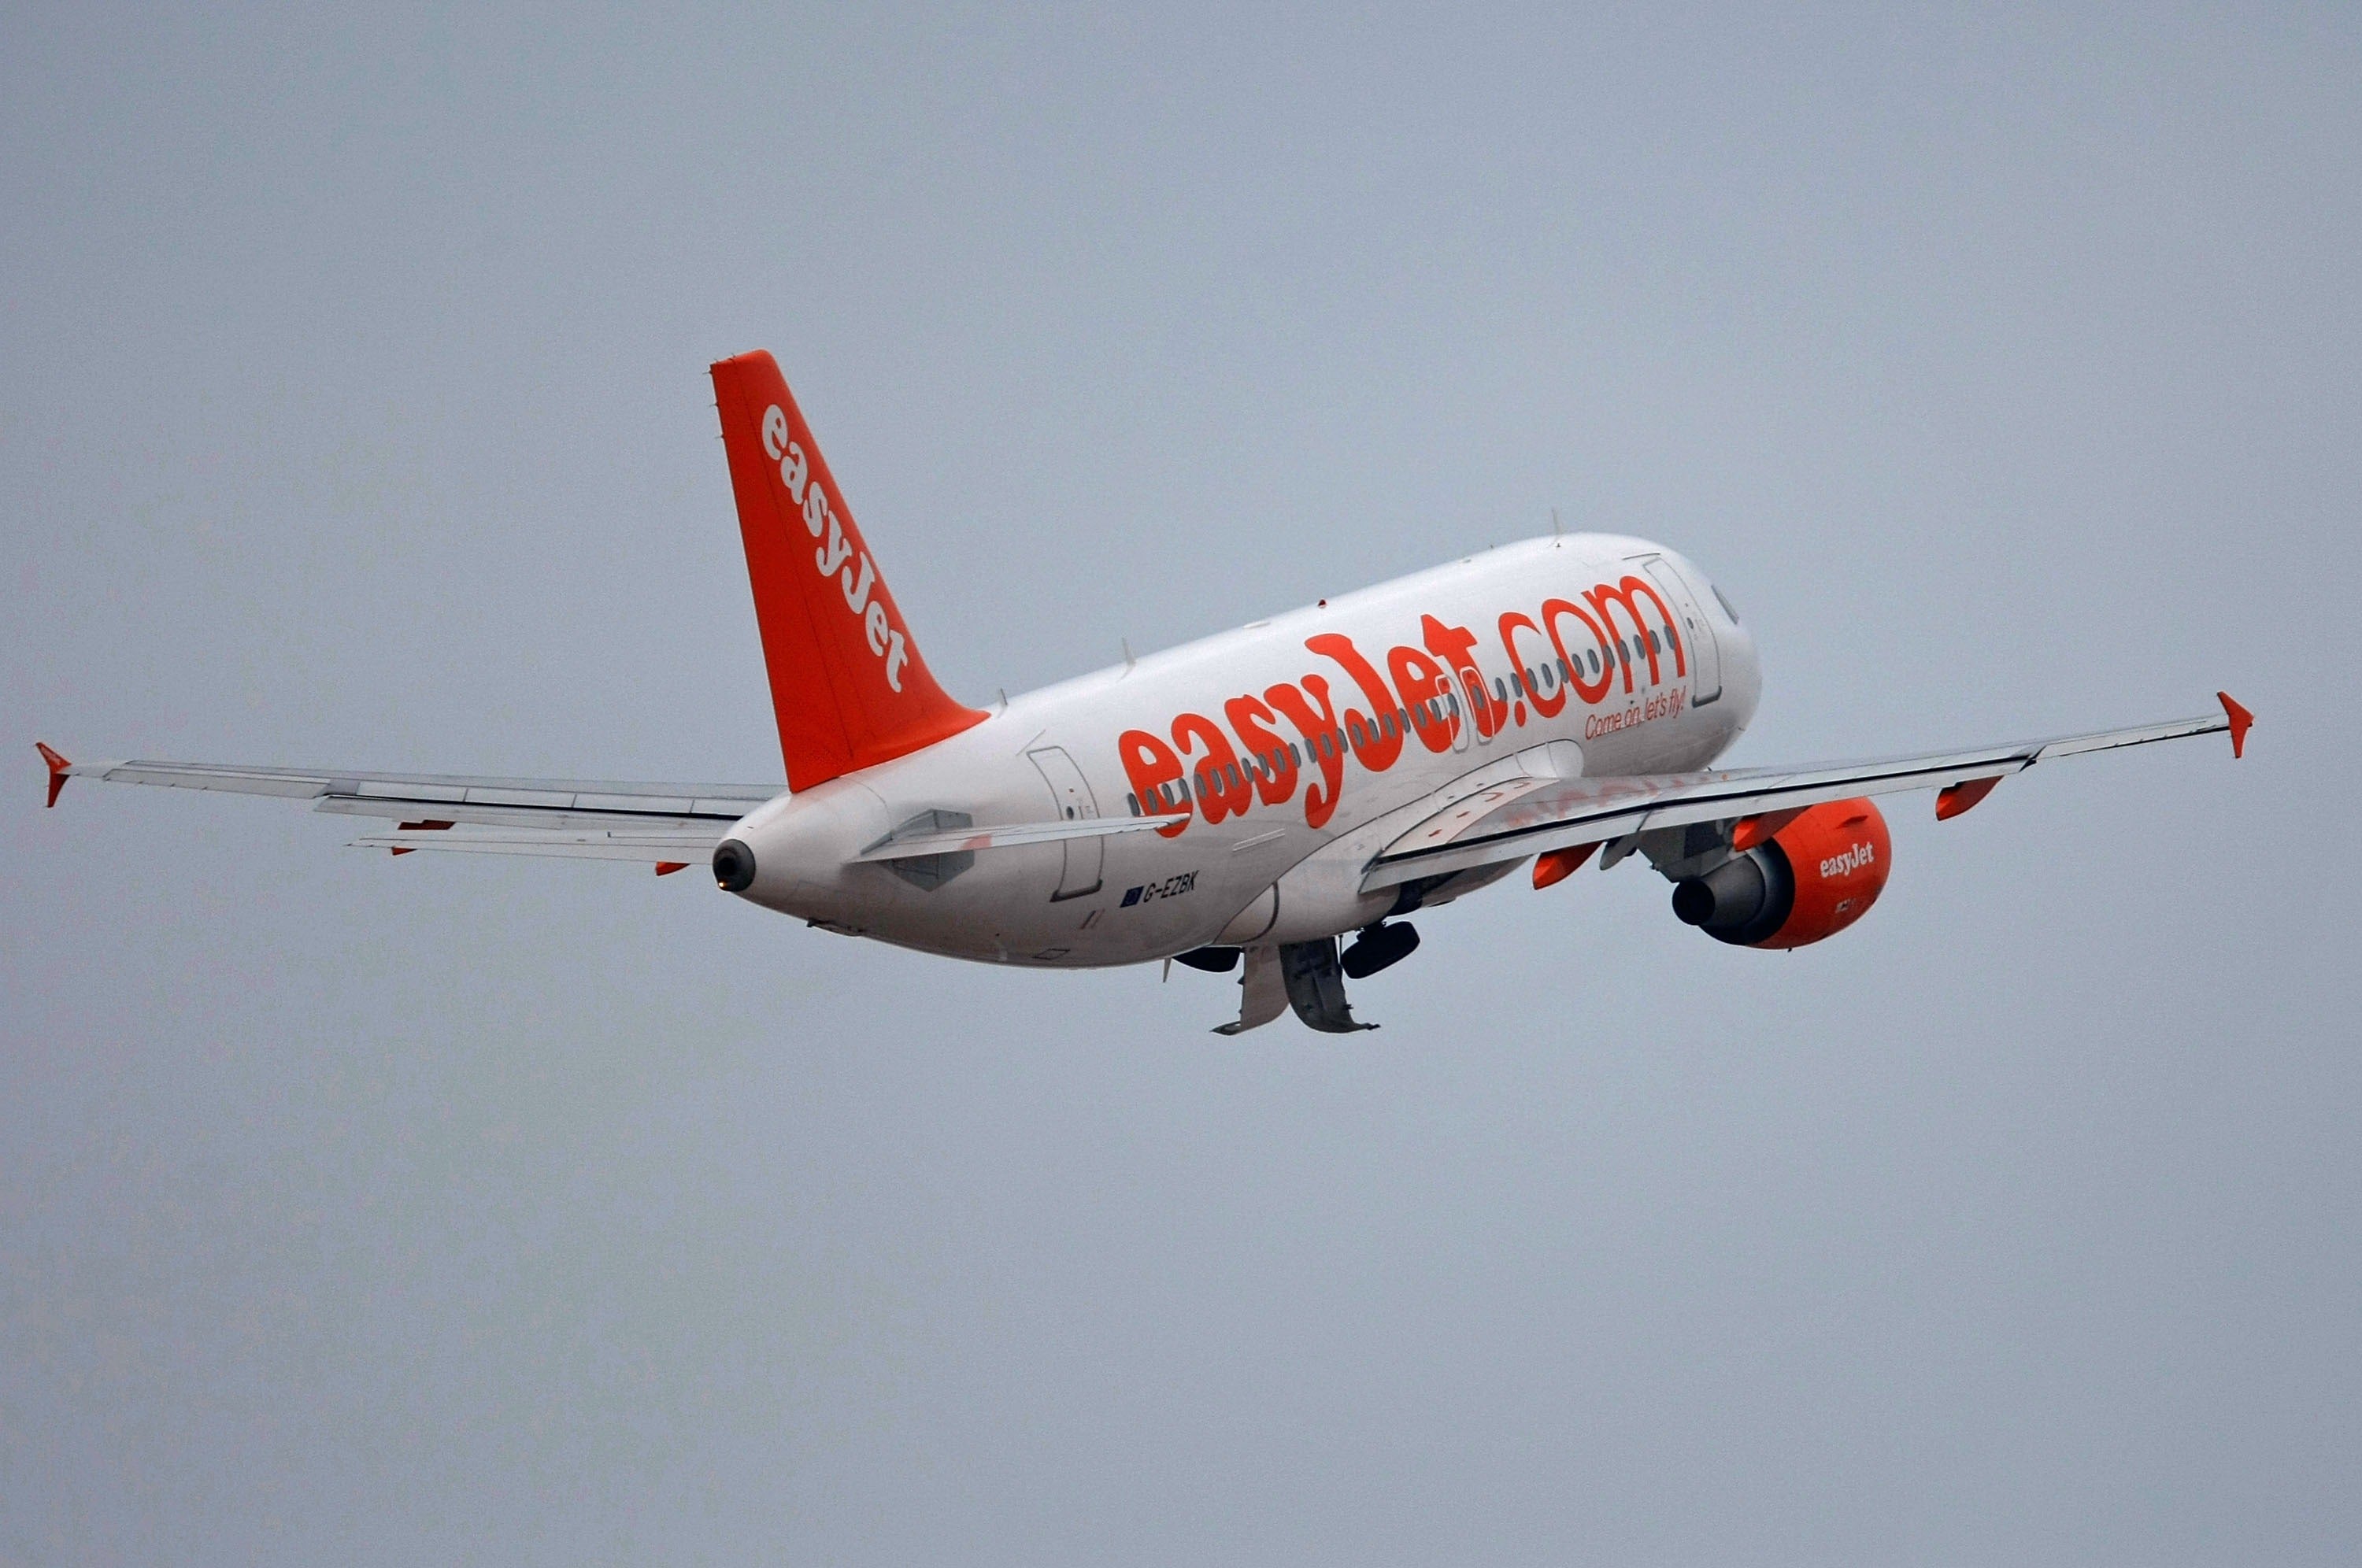 The easyJet plane came within 10ft of the drone